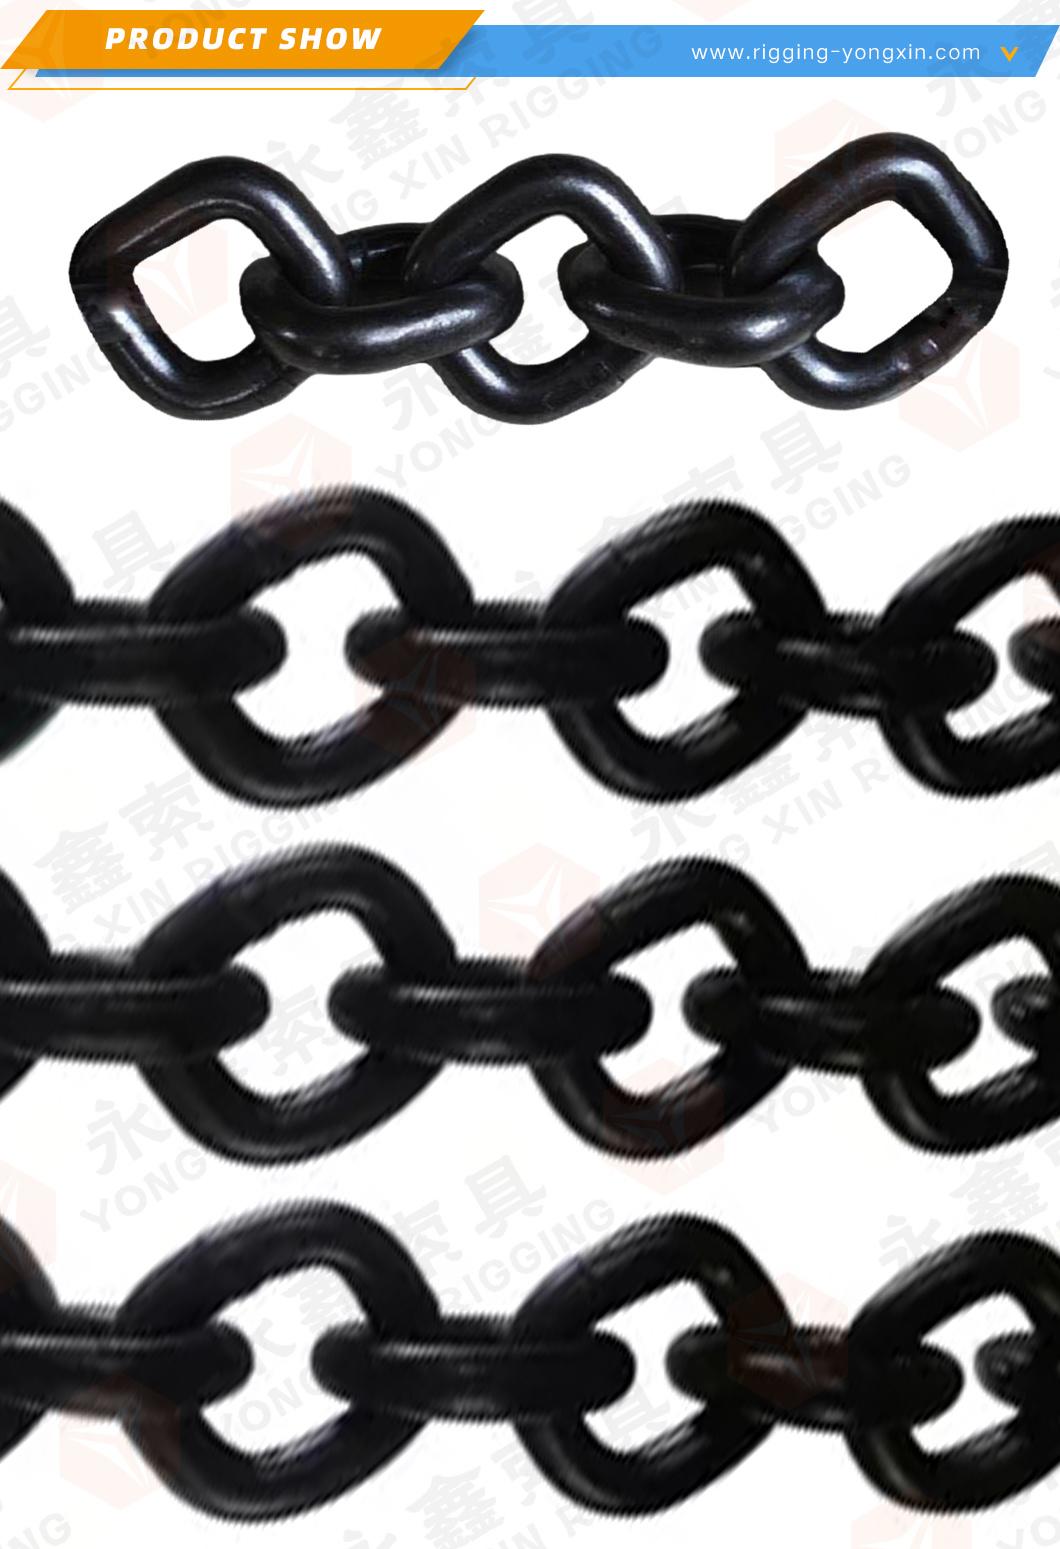 High Quality Polish Safe and Durable Material 20mn2 Lifting Lashing Chain for Load and Binding